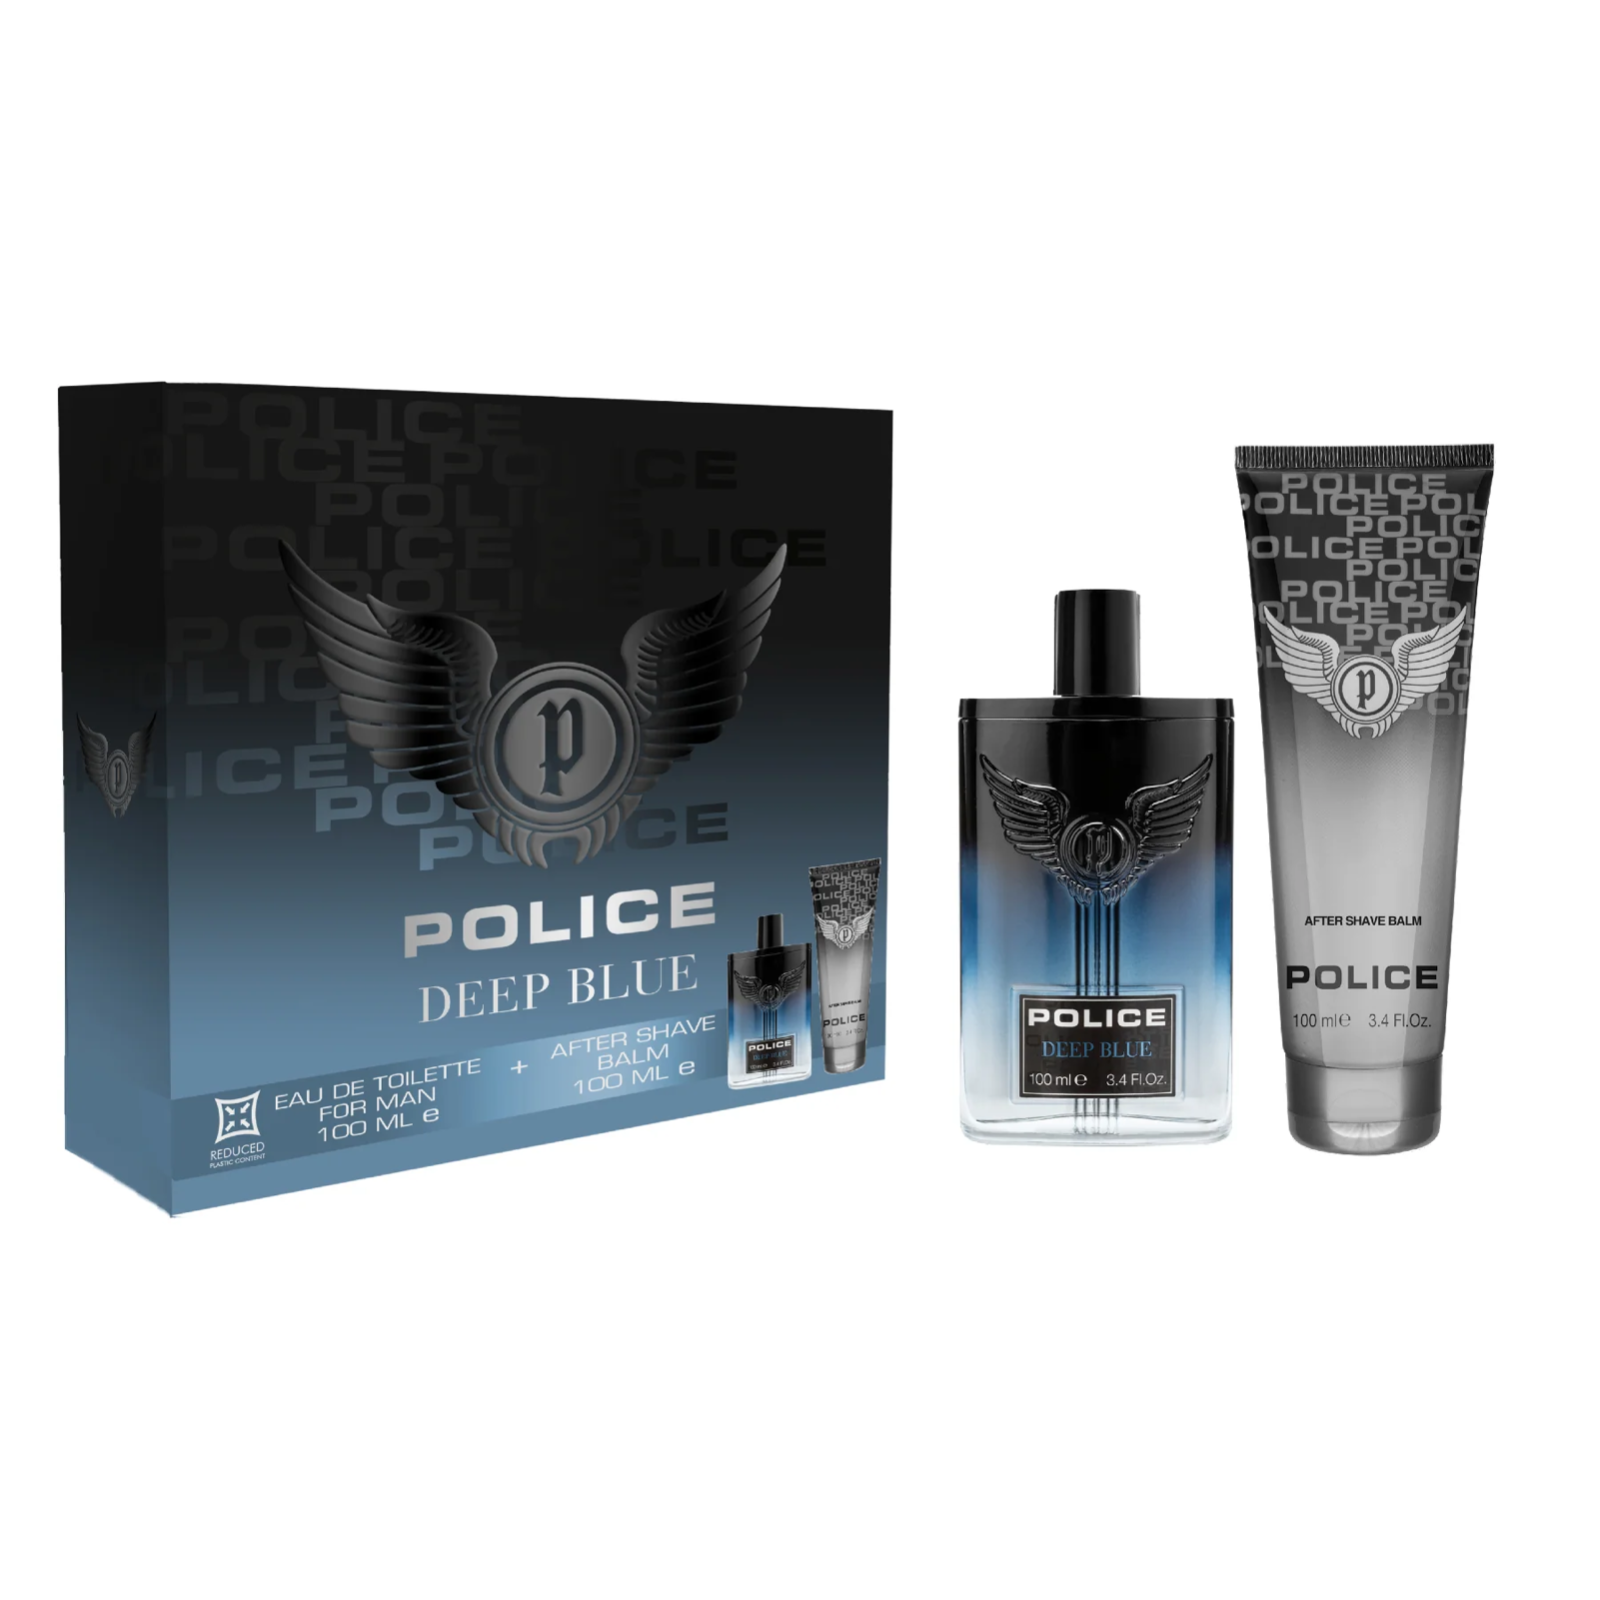 Police Deep Blue Natural Spray & After Shave Balm 100ml Gift Set RRP 35 CLEARANCE XL 29.99